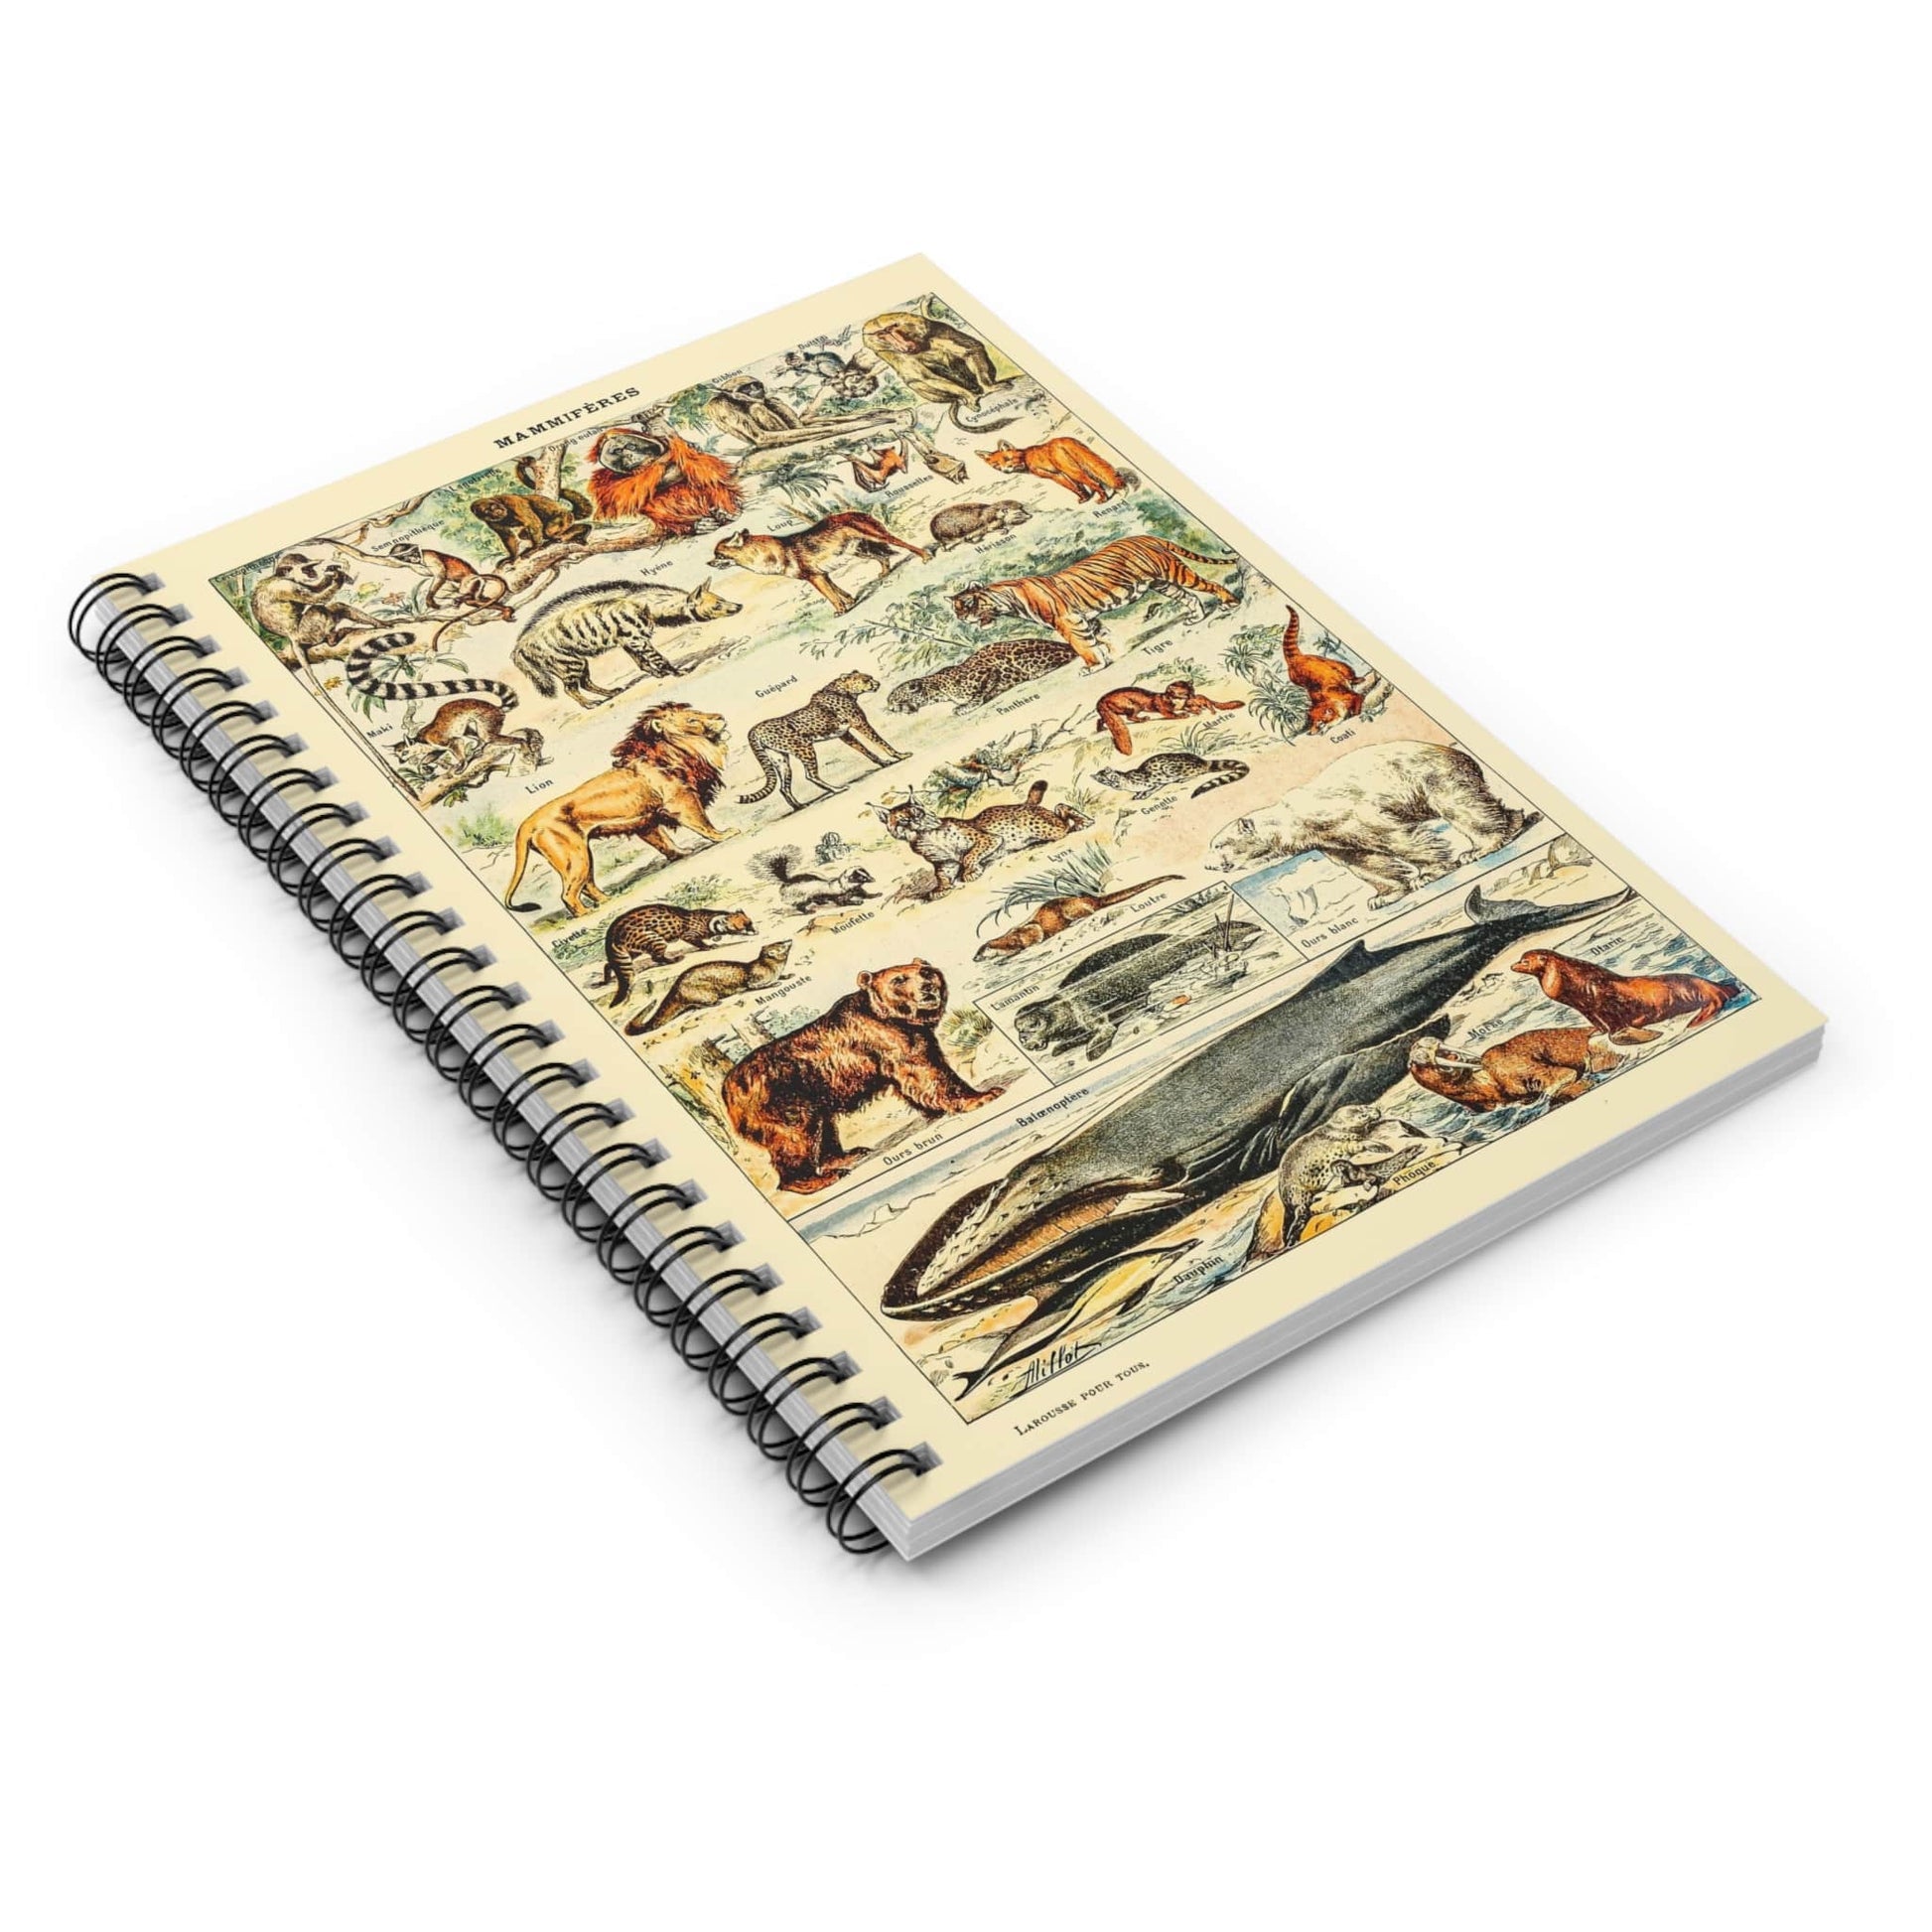 Wild Animals Spiral Notebook Laying Flat on White Surface